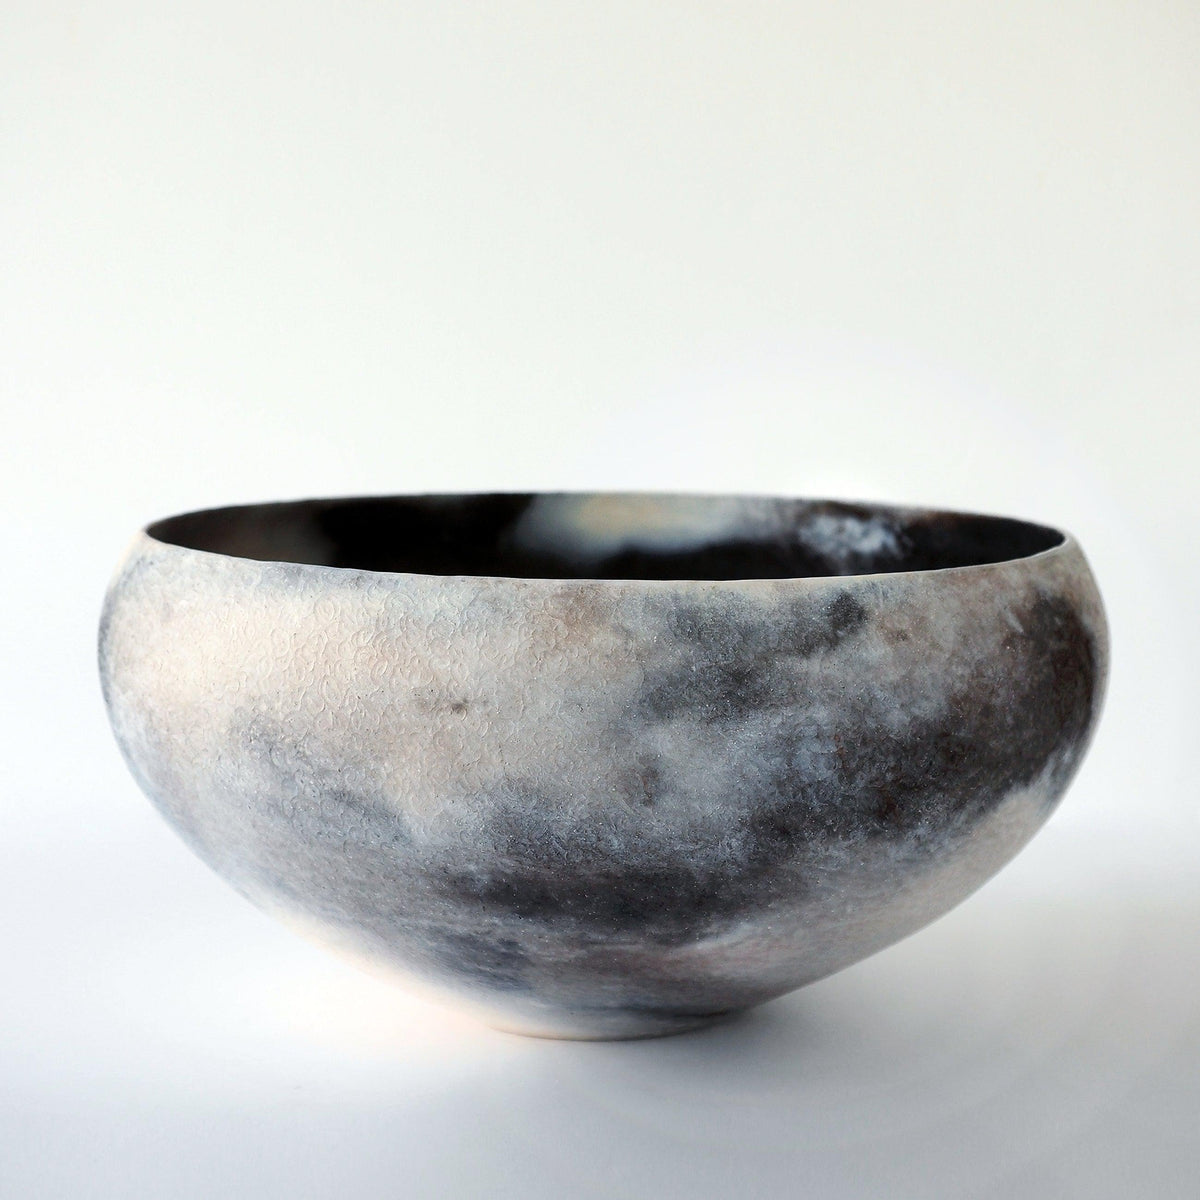 &#39;BJ16 Large Bowl&#39; by Bridget Johnson ceramics available at Padstow Gallery, Cornwall